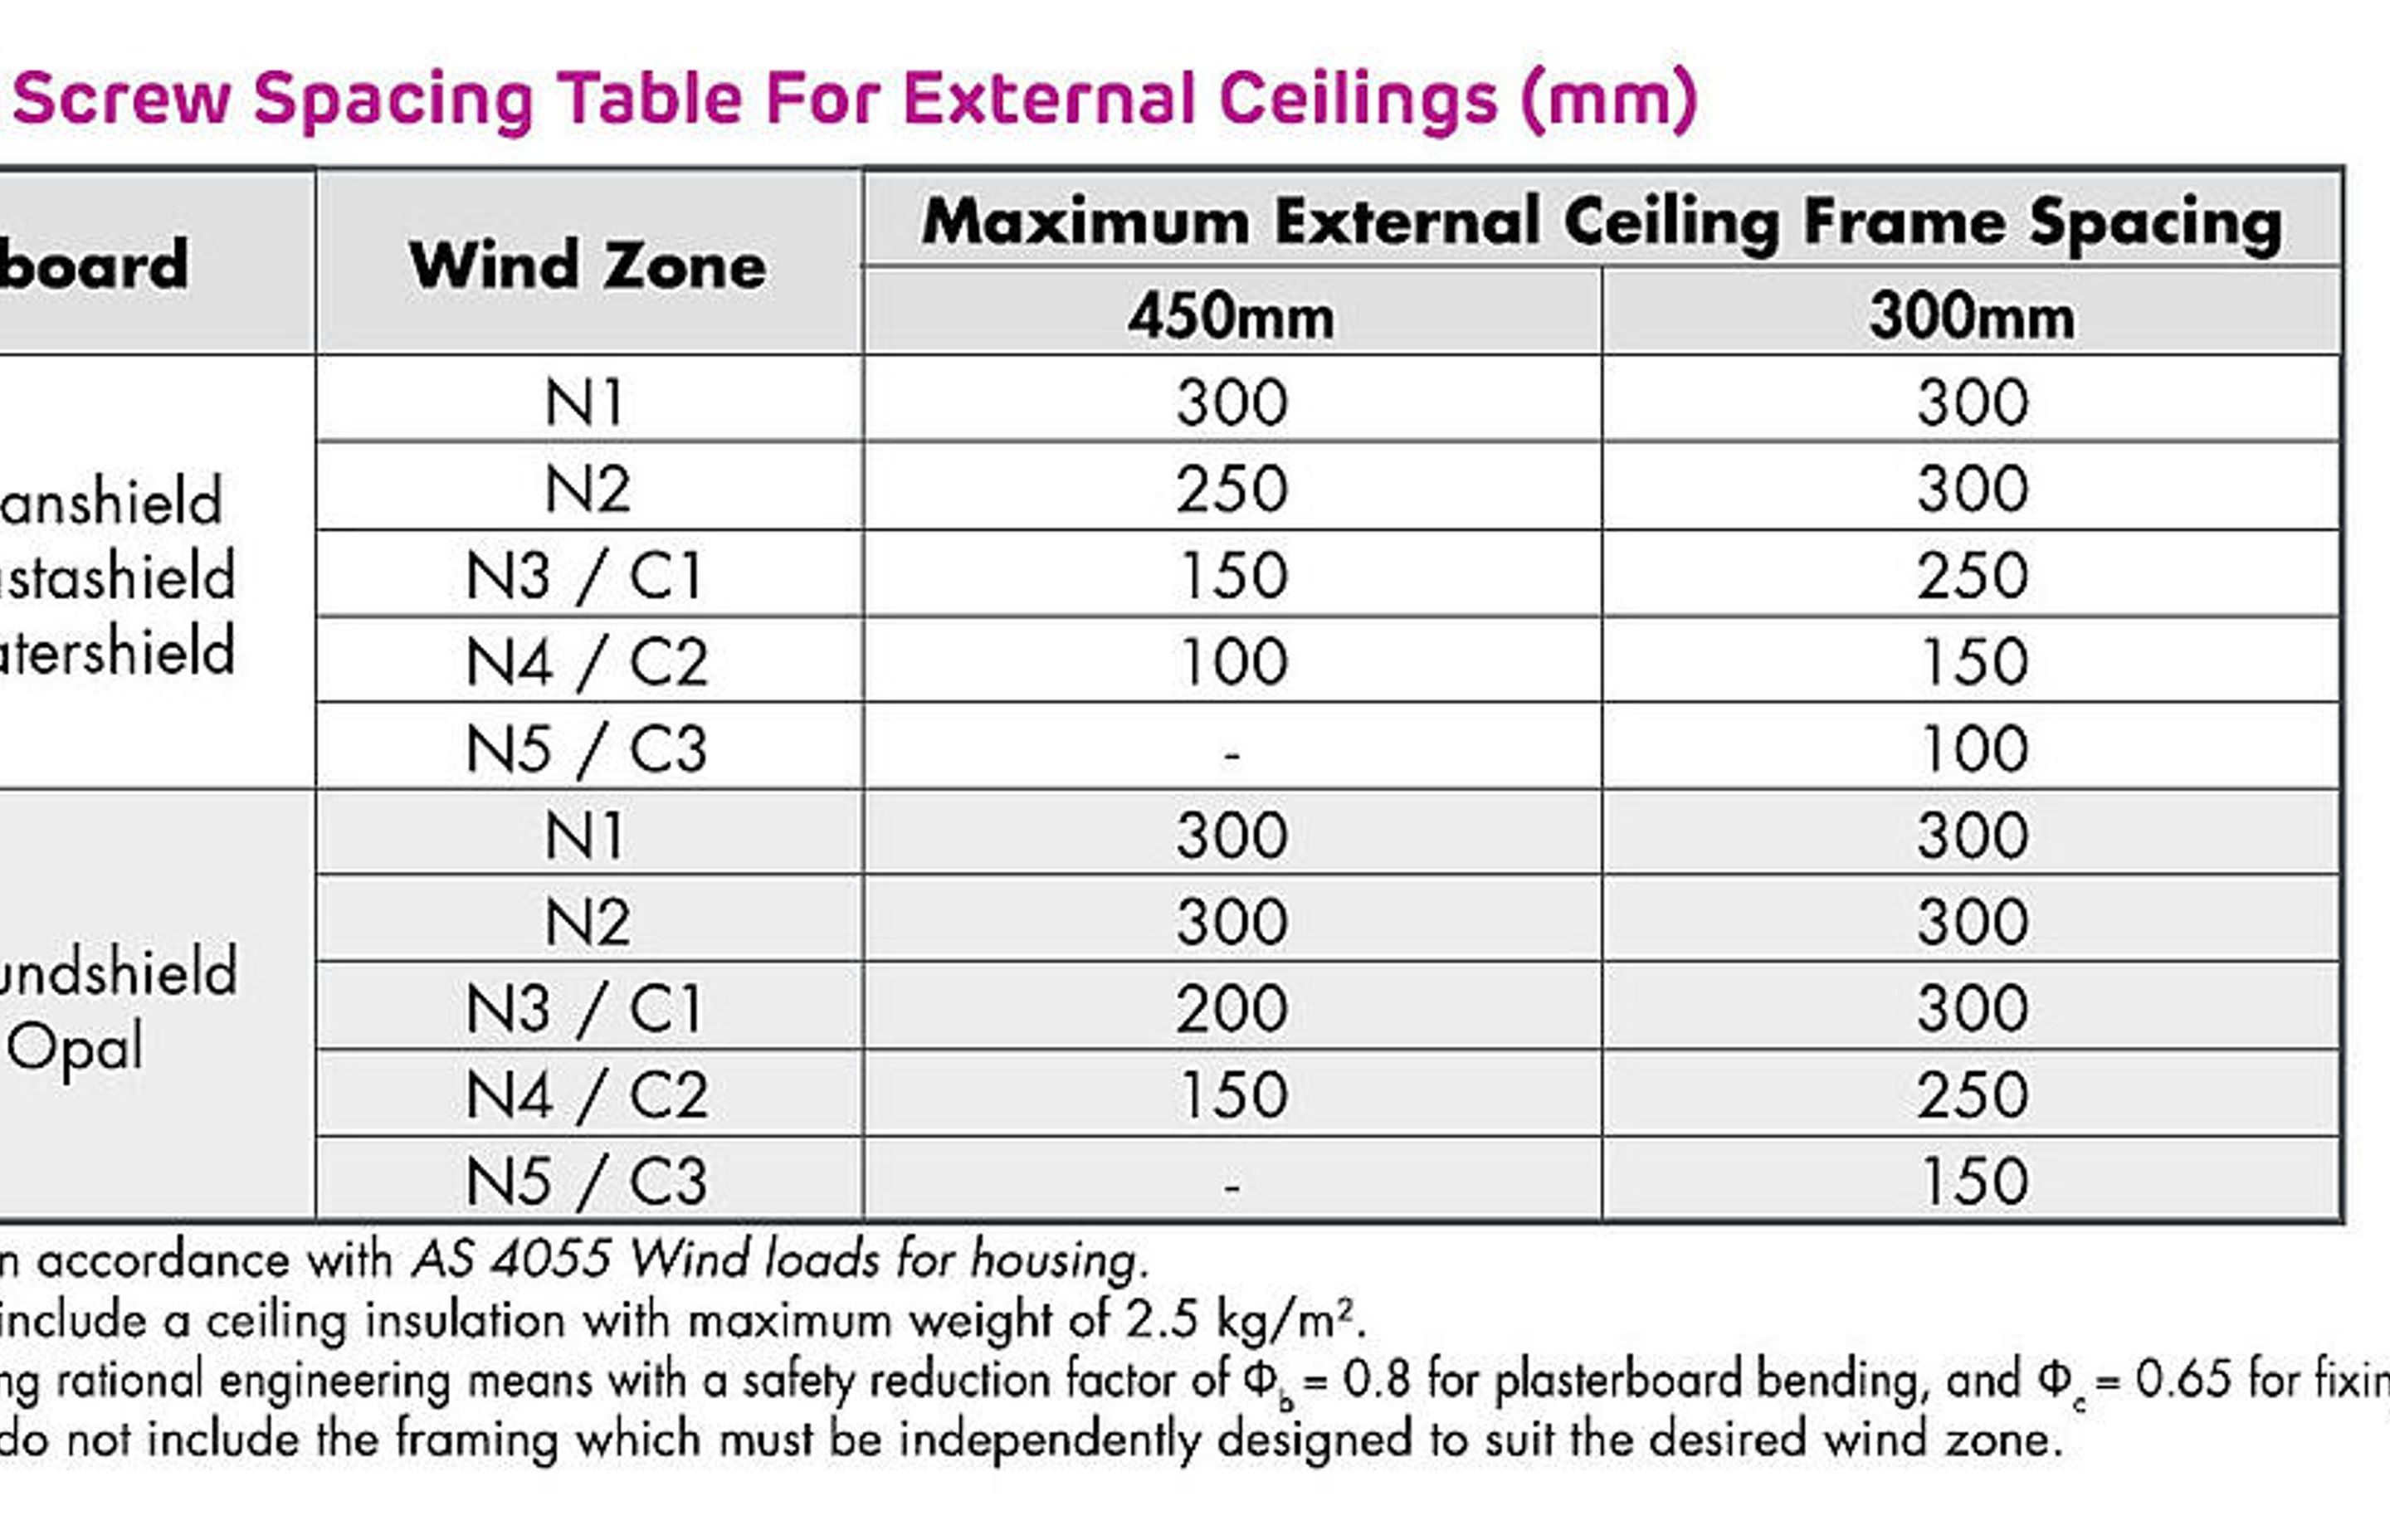 External Plasterboard Ceilings: What you need to know